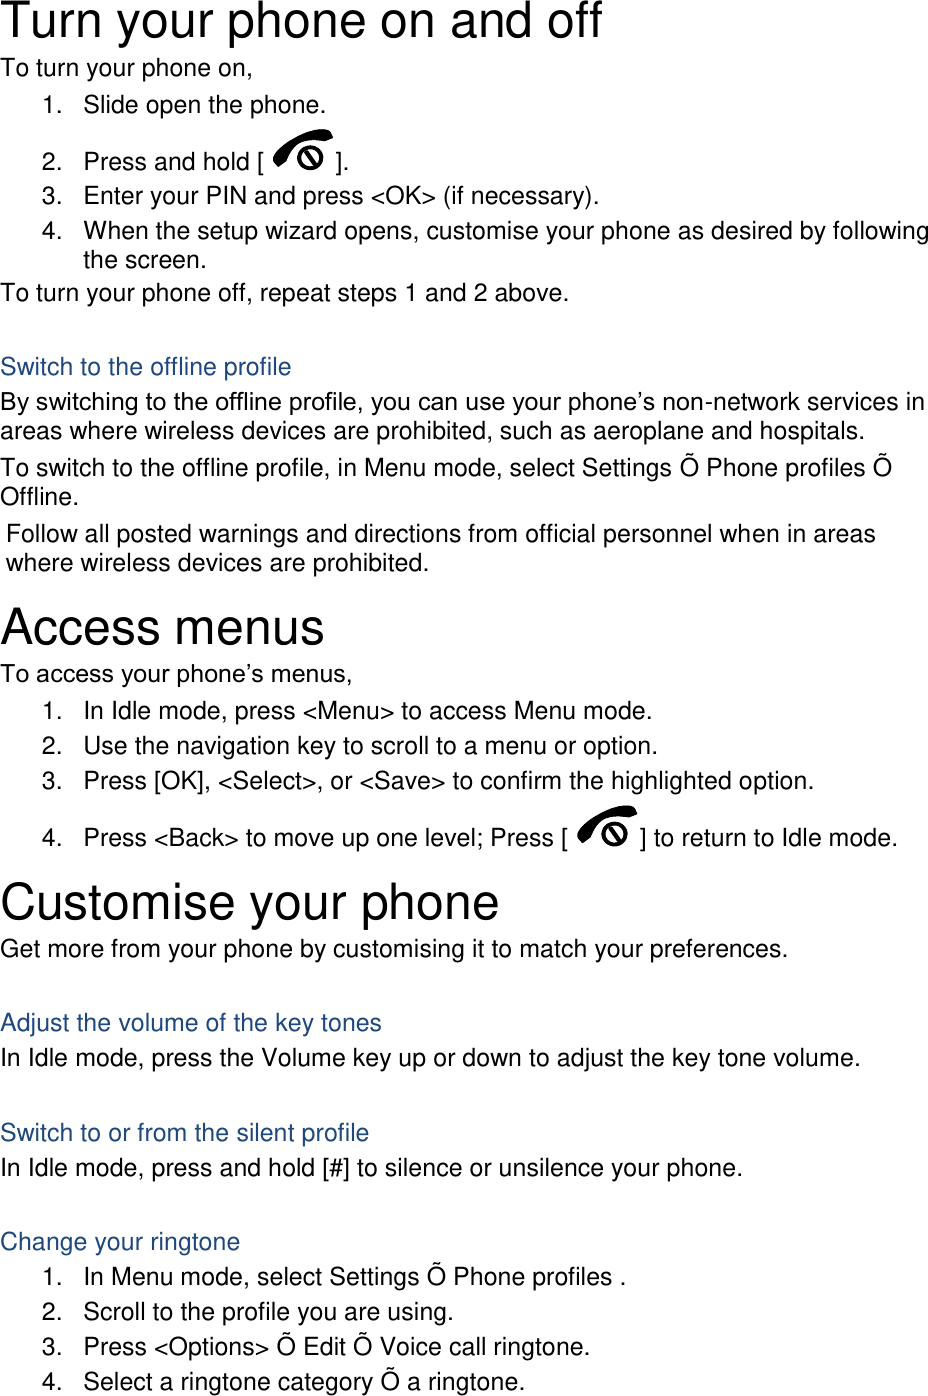 Turn your phone on and off To turn your phone on, 1. Slide open the phone.2. Press and hold [ ]. 3. Enter your PIN and press &lt;OK&gt; (if necessary).4. When the setup wizard opens, customise your phone as desired by followingthe screen.To turn your phone off, repeat steps 1 and 2 above. Switch to the offline profile By switching to the offline profile, you can use your phone’s non-network services in areas where wireless devices are prohibited, such as aeroplane and hospitals. To switch to the offline profile, in Menu mode, select Settings Õ  Phone profiles ÕOffline. Follow all posted warnings and directions from official personnel when in areas where wireless devices are prohibited. Access menus To access your phone’s menus, 1. In Idle mode, press &lt;Menu&gt; to access Menu mode.2. Use the navigation key to scroll to a menu or option.3. Press [OK], &lt;Select&gt;, or &lt;Save&gt; to confirm the highlighted option.4. Press &lt;Back&gt; to move up one level; Press [ ] to return to Idle mode. Customise your phone Get more from your phone by customising it to match your preferences. Adjust the volume of the key tones In Idle mode, press the Volume key up or down to adjust the key tone volume. Switch to or from the silent profile In Idle mode, press and hold [#] to silence or unsilence your phone. Change your ringtone 1. In Menu mode, select Settings Õ  Phone profiles .2. Scroll to the profile you are using.3. Press &lt;Options&gt; Õ  Edit Õ  Voice call ringtone.4. Select a ringtone category Õ  a ringtone.